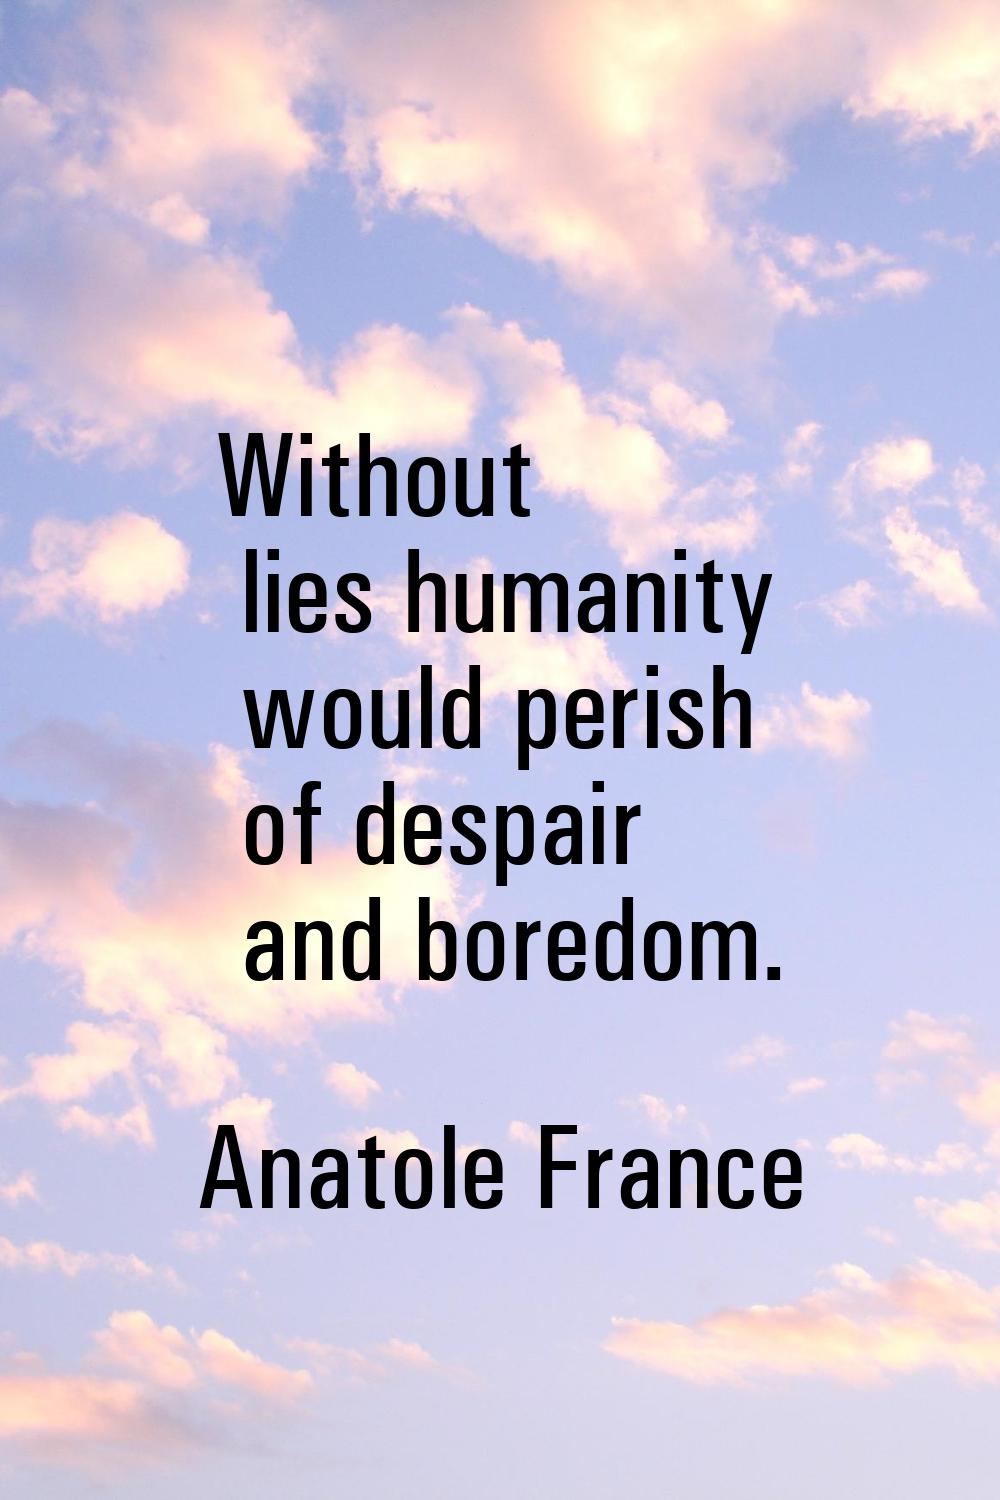 Without lies humanity would perish of despair and boredom.